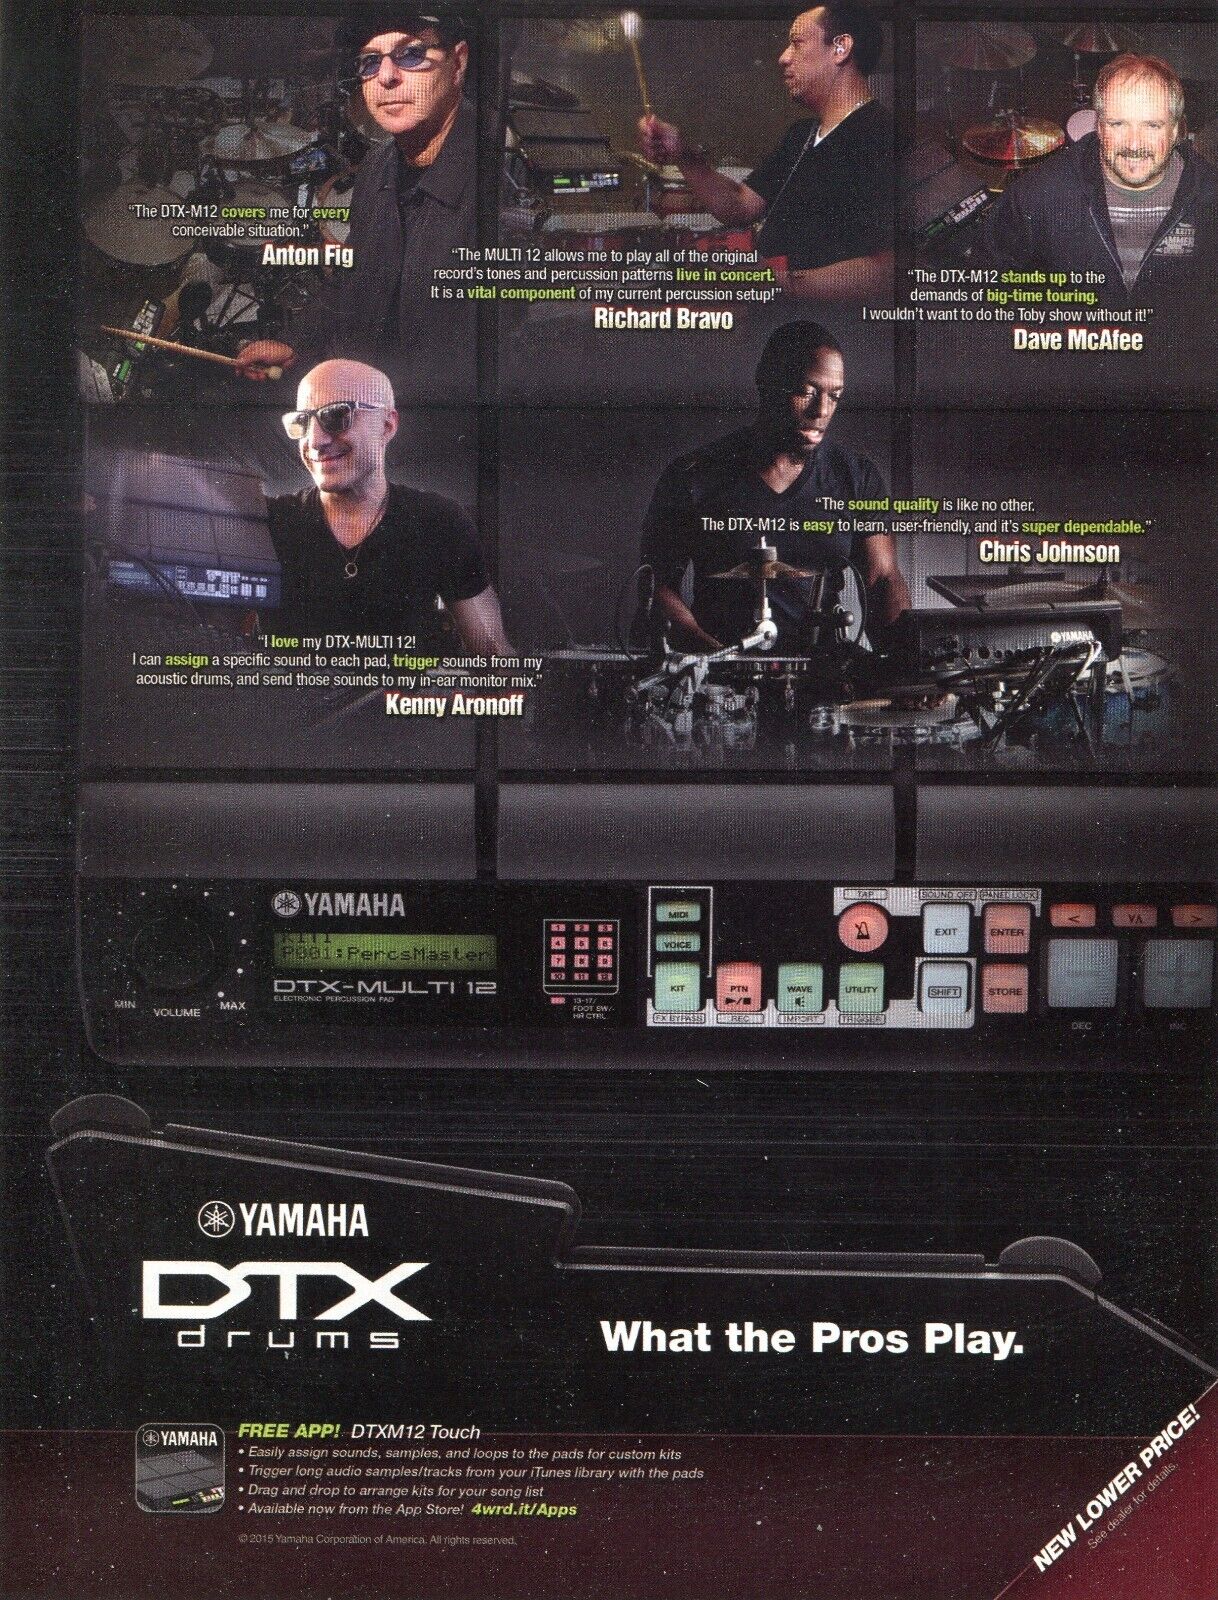 2015 Print Ad Yamaha DTX-Multi 12 Electronic Drums w Dave McAfee Anton Fig